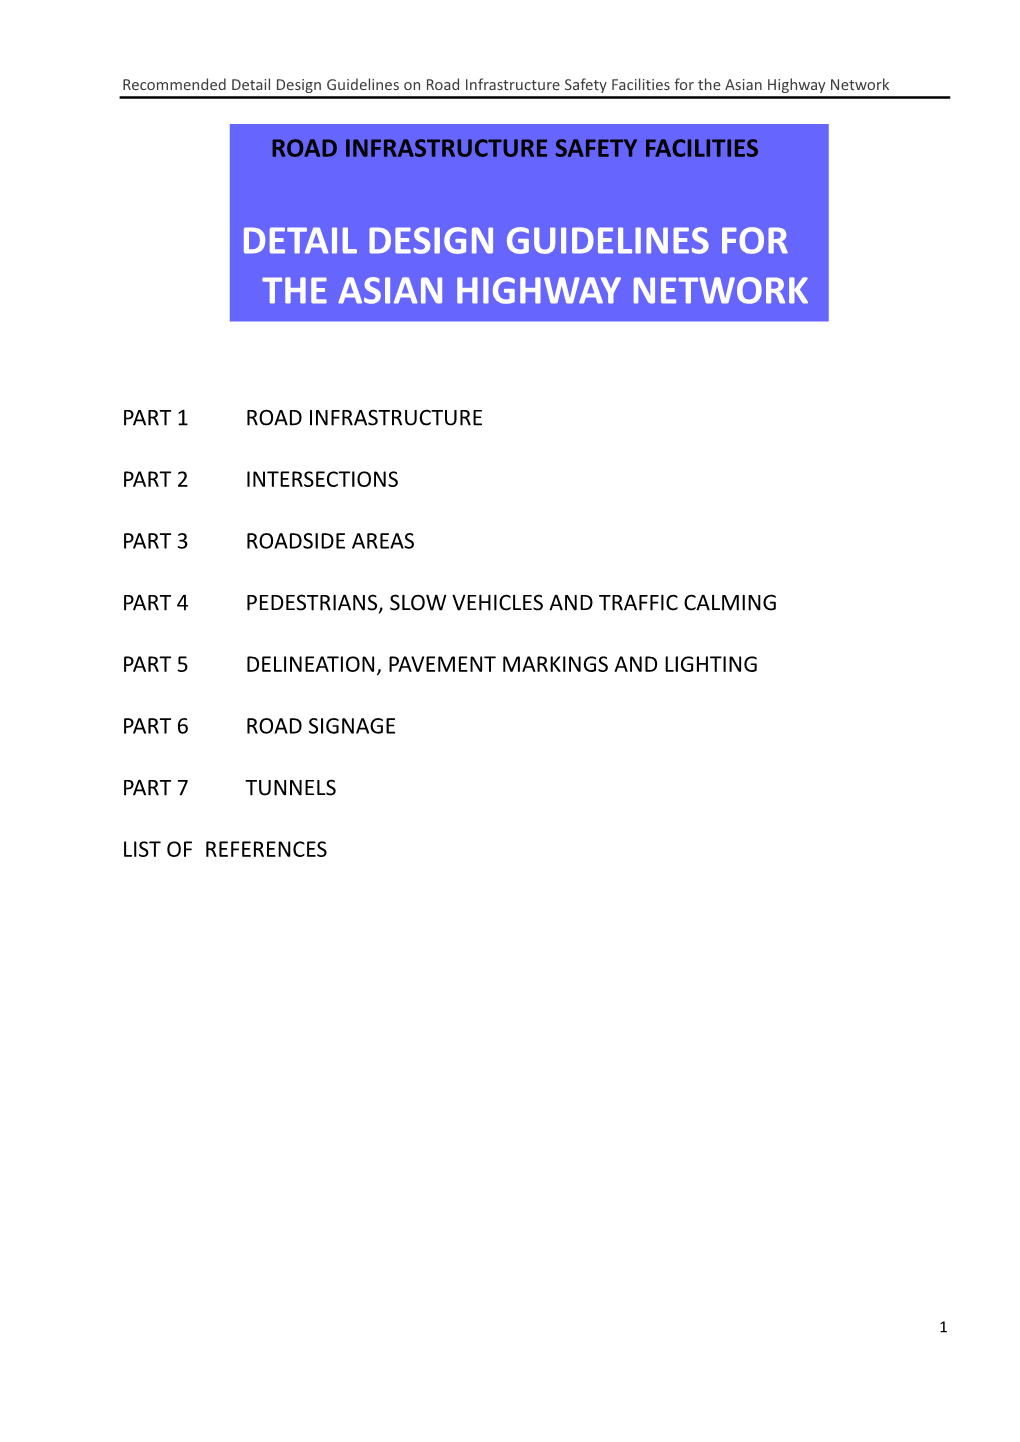 Detail Design Guidelines for the Asian Highway Network